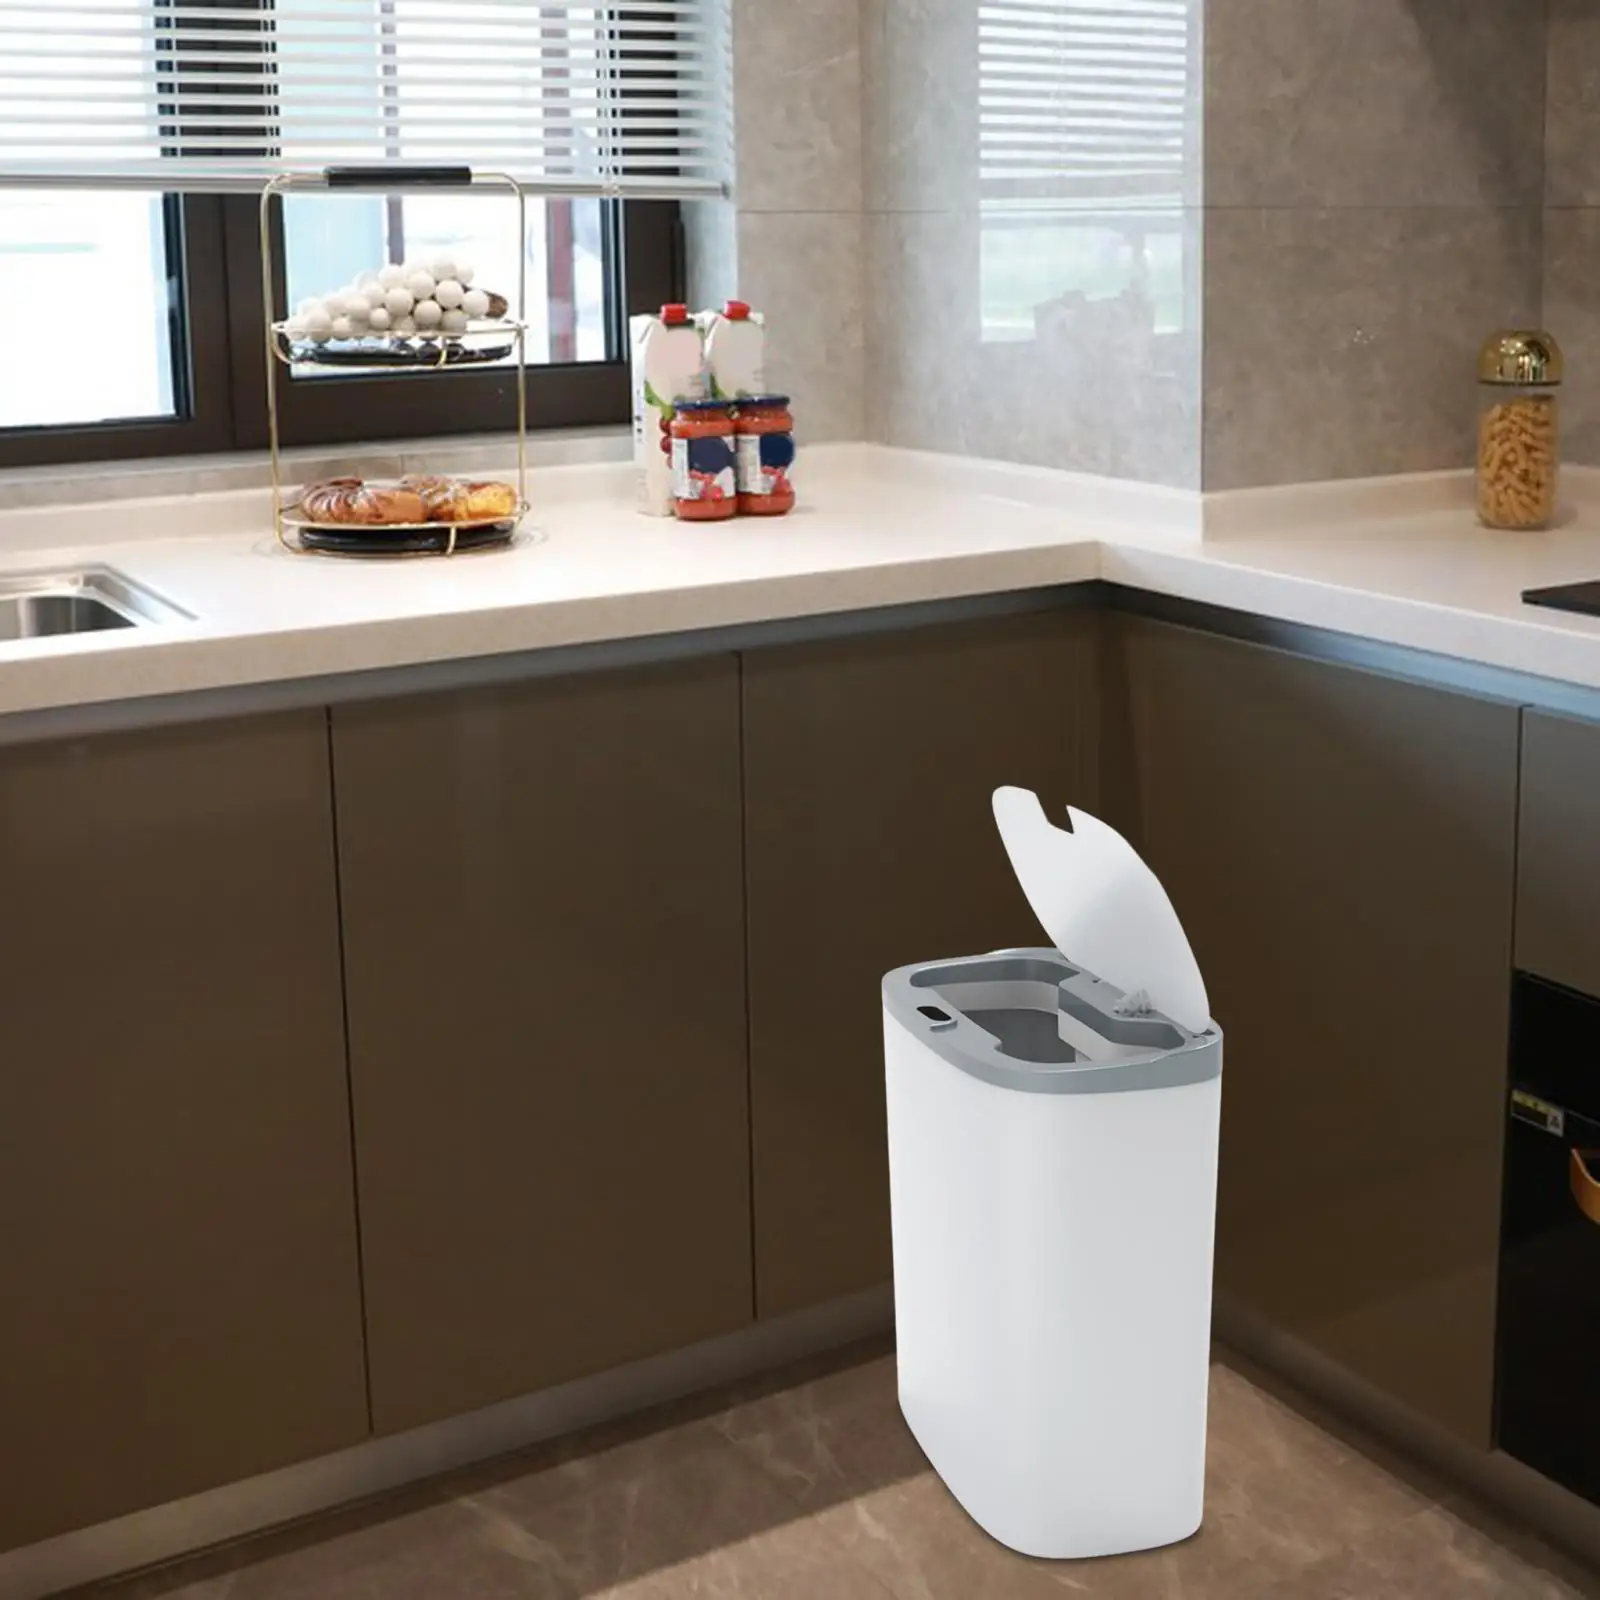 Intelligent Induction Trash Bin, Automatic Garbage Can, Portable Toilet Space Saving Narrow Electric Garbage Bin for Corner